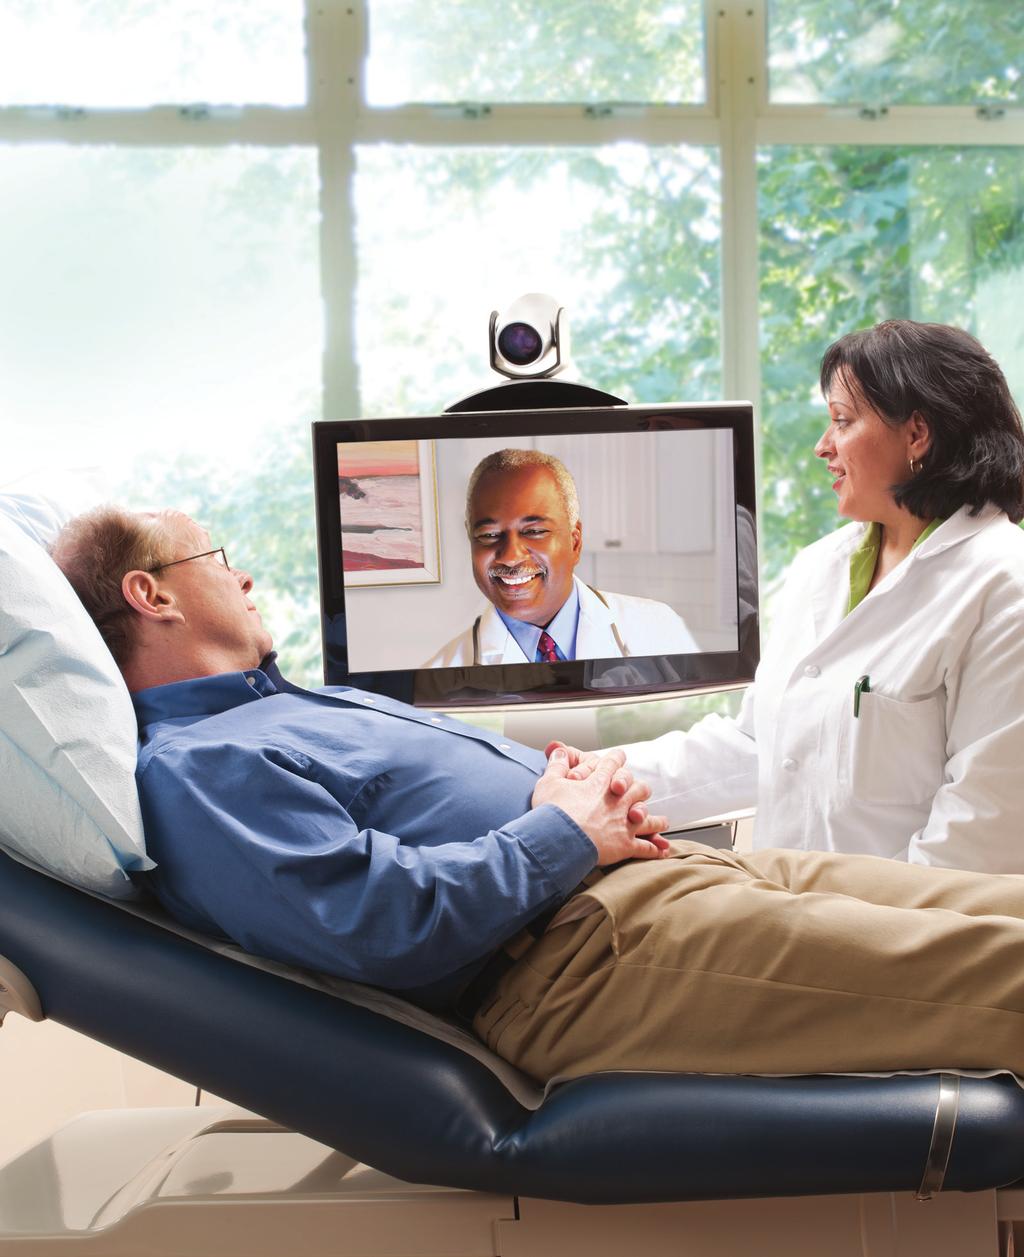 Contact Us Contact us for information about how UPMC can provide you and your patients with access to expert telemedicine services.